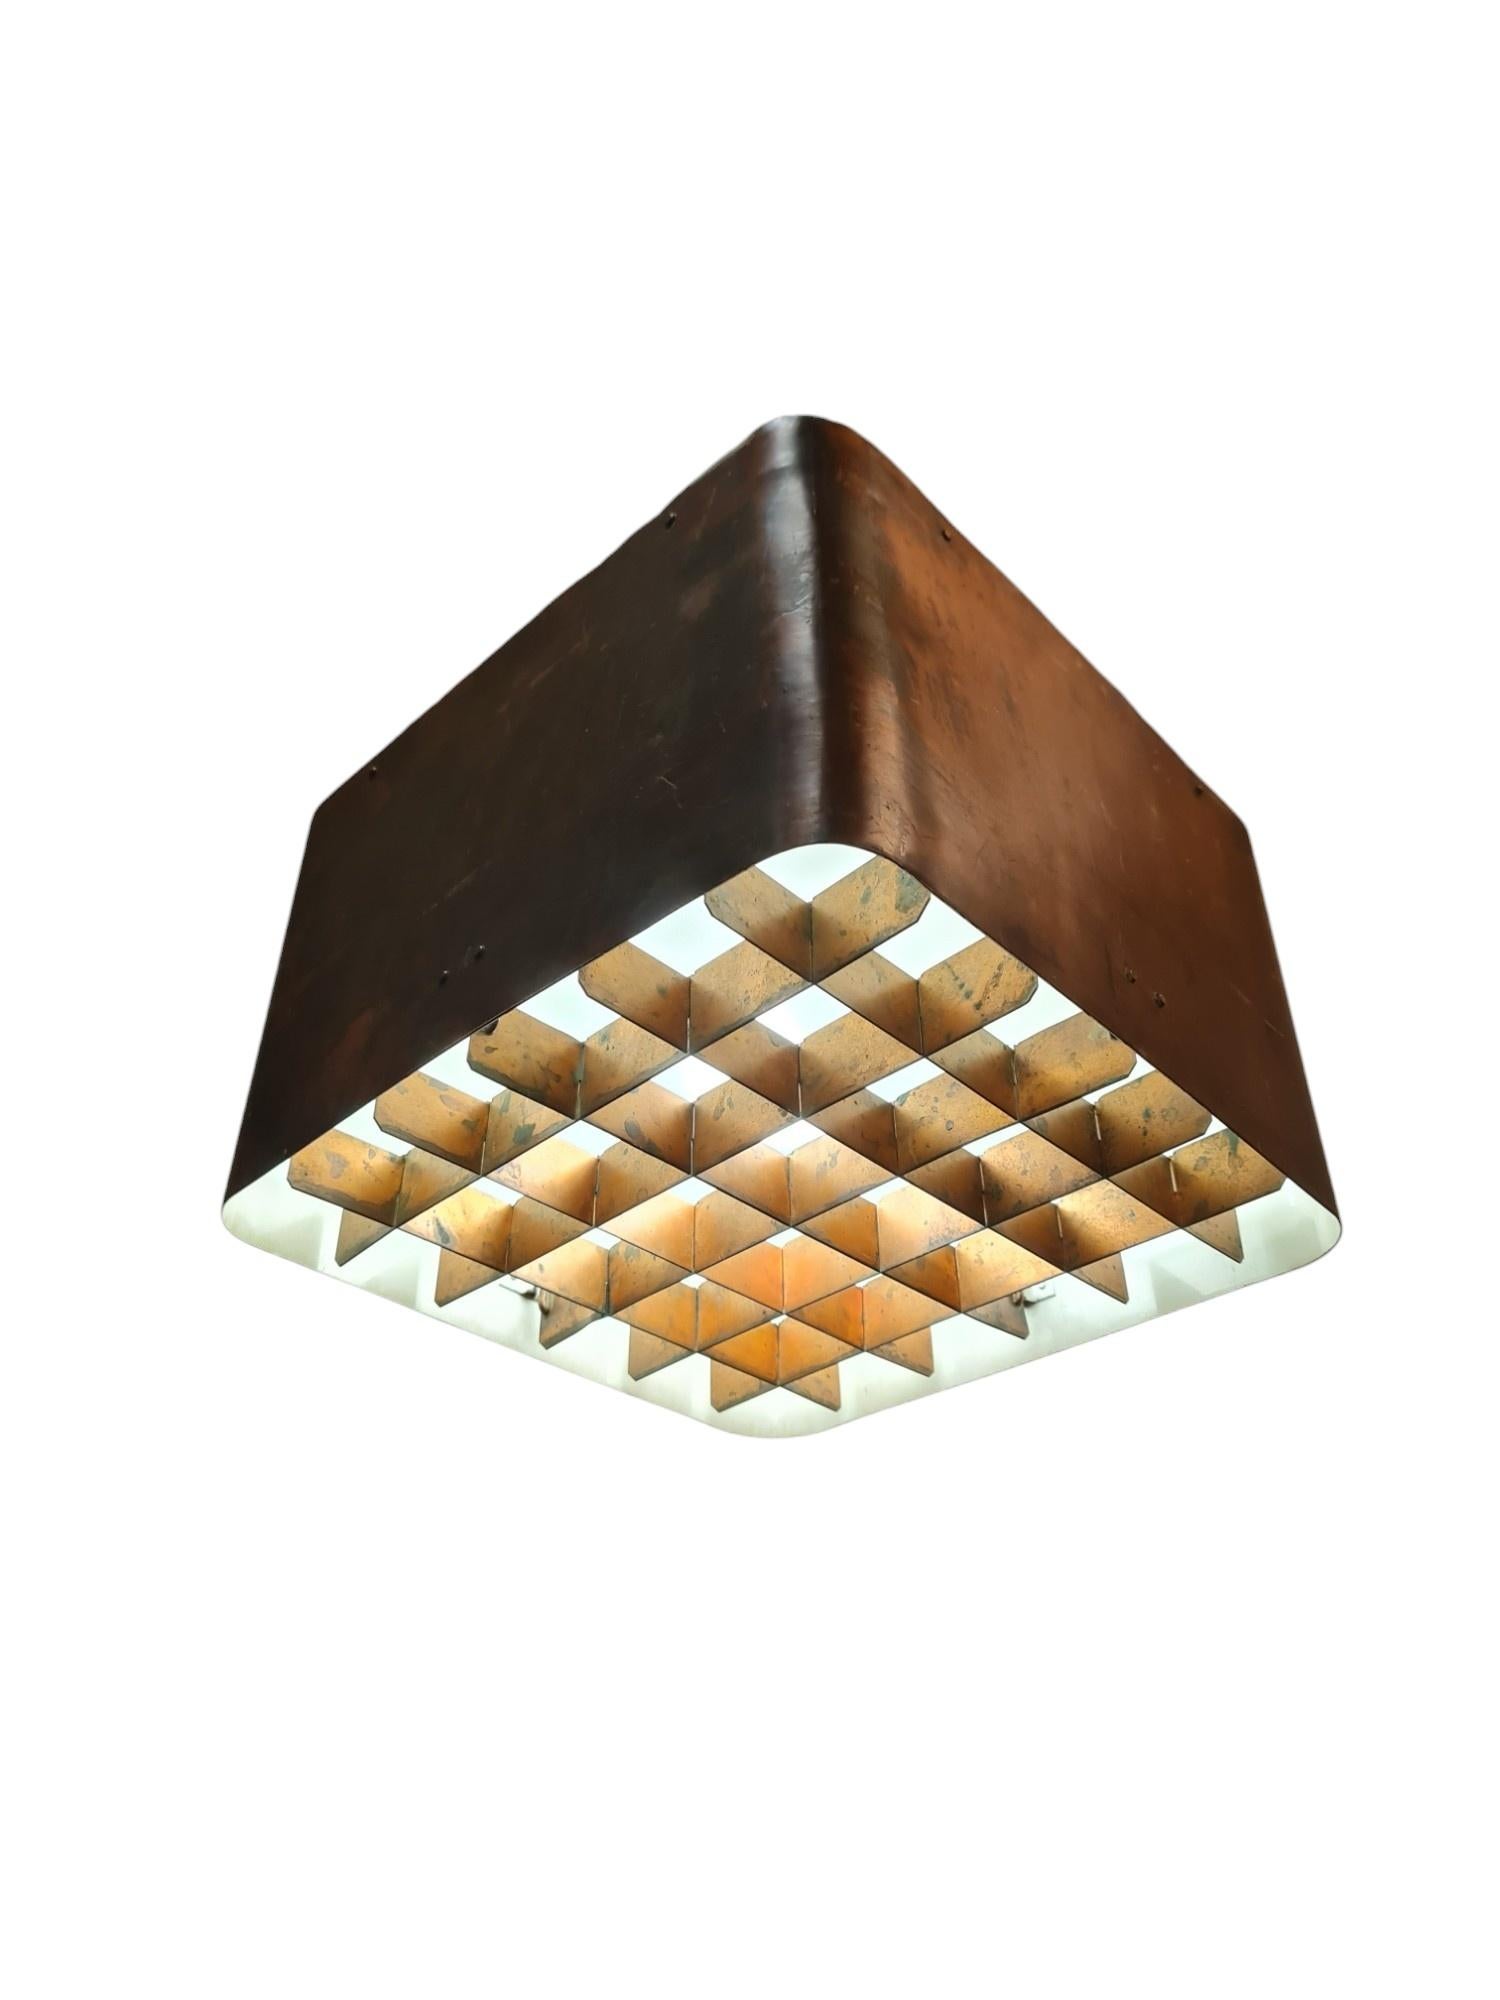 Paavo Tynell Ceiling Lamp 80648 in Copper, Idman 1950s For Sale 3